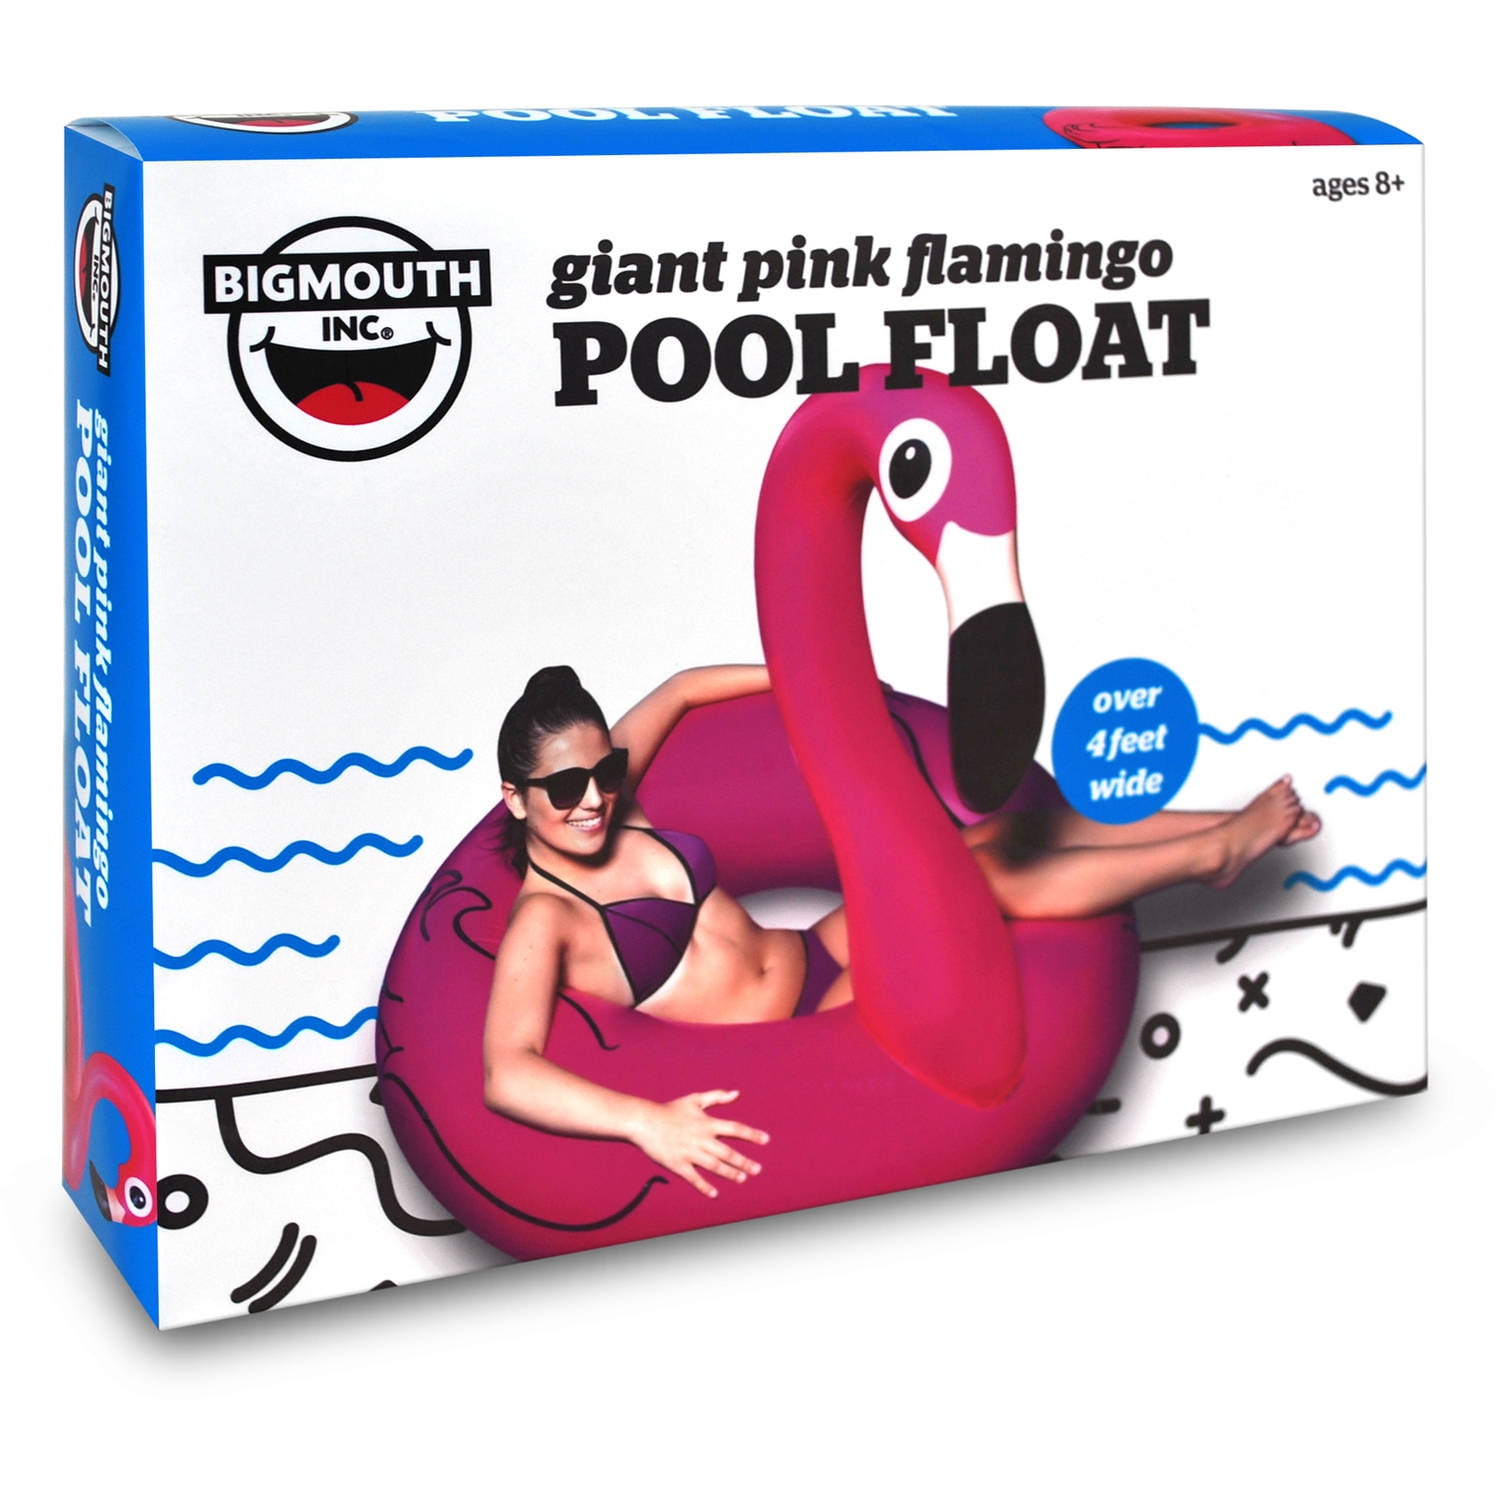 Big Mouth Giant Pink Flamingo Beach Pool Float Ring for Ages 8 4feet Wide for sale online 